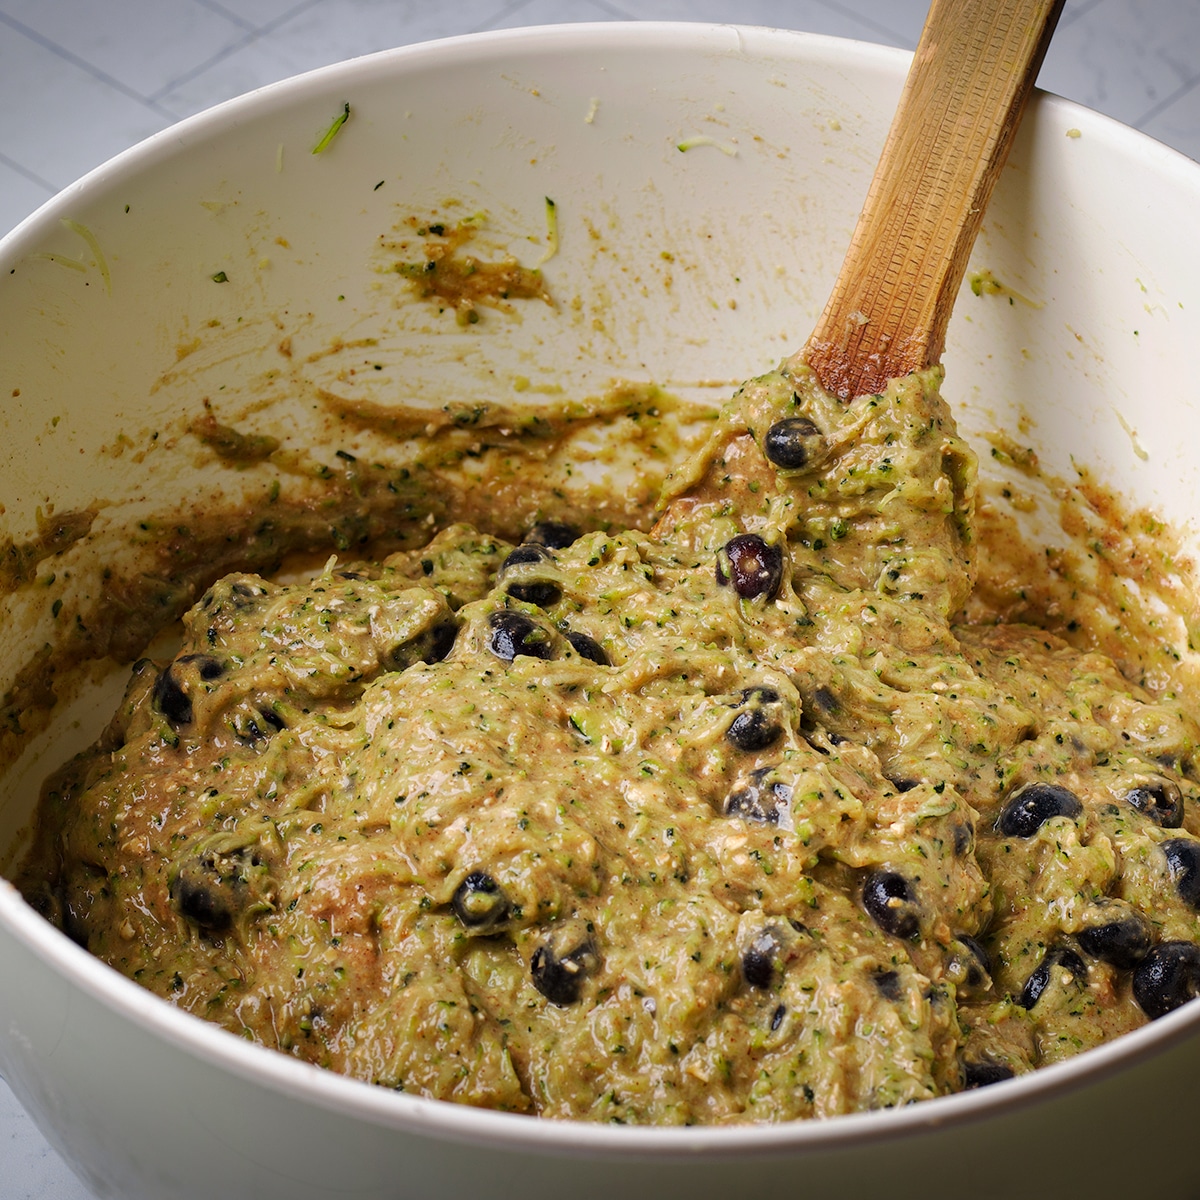 Using a wooden spoon to mix blueberries into zucchini muffin batter.